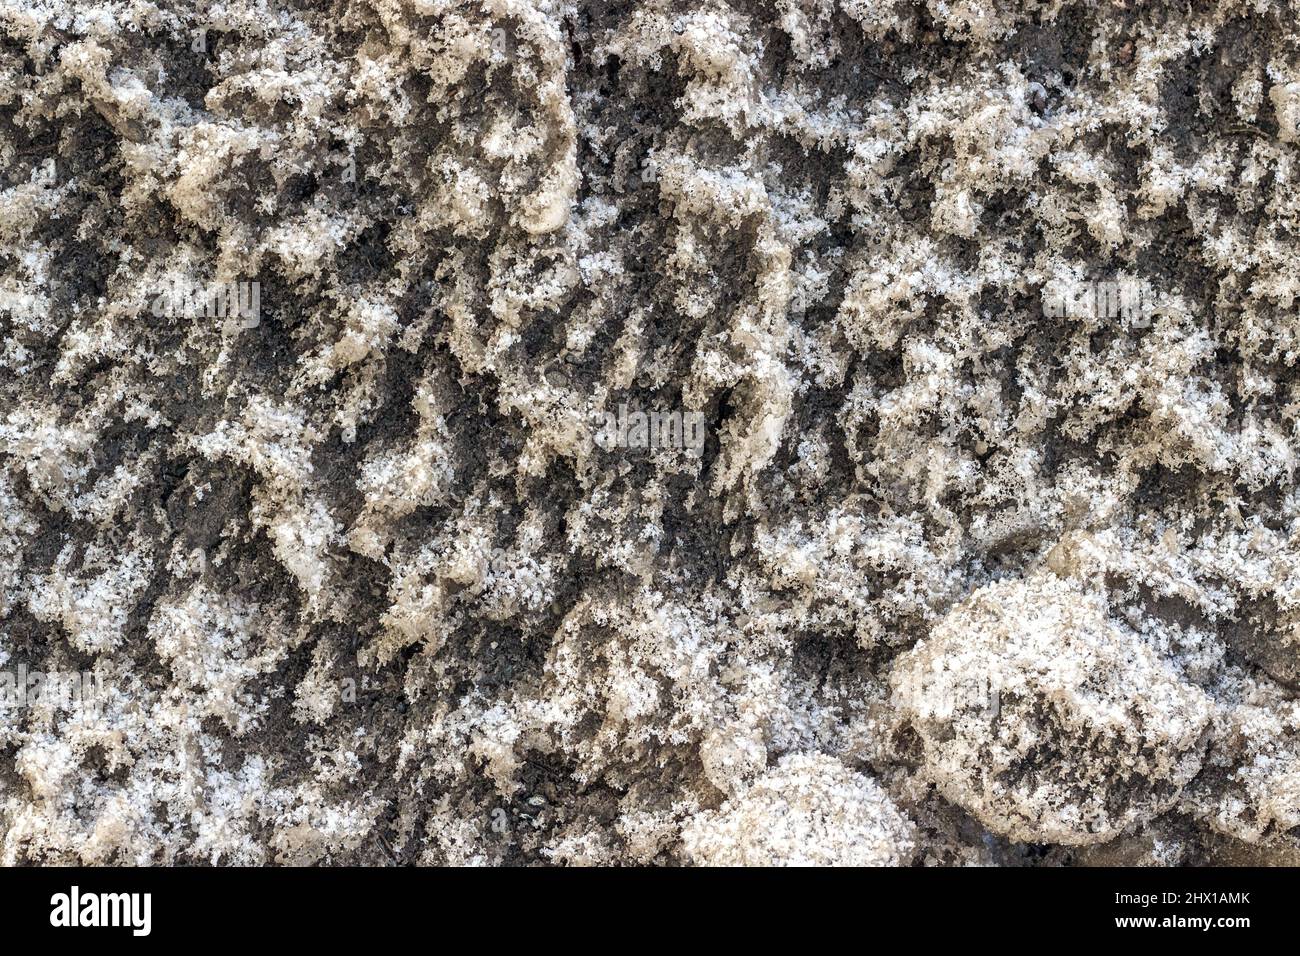 Dirty snow, texture or background. Stock Photo